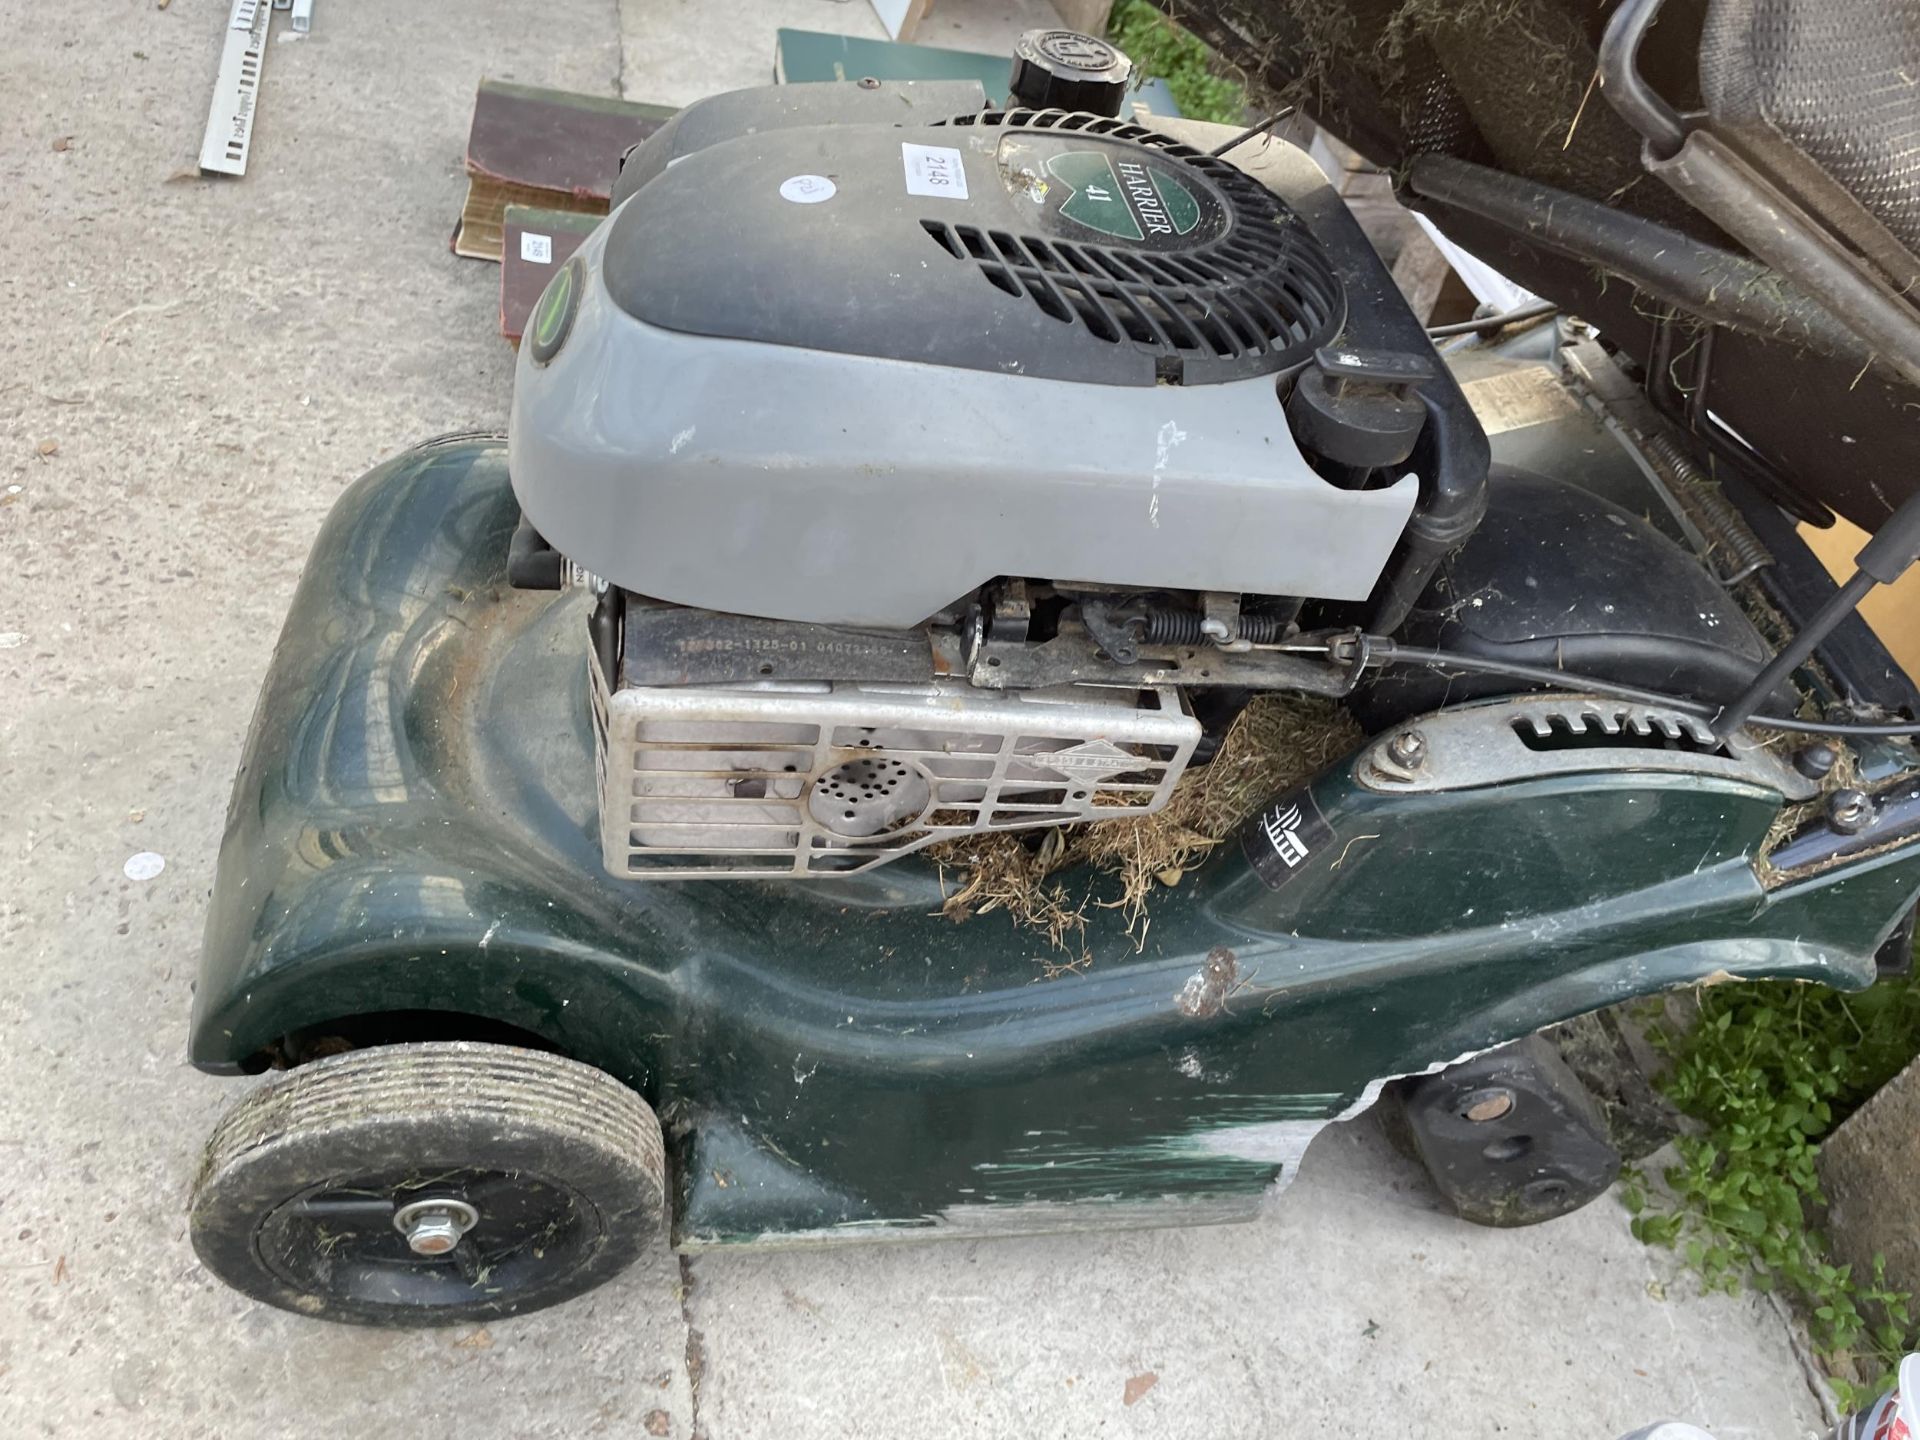 A HAYTER HARRIER 41 PETROL LAWN MOWER COMPLETE WITH GRASS BOX - Image 3 of 3